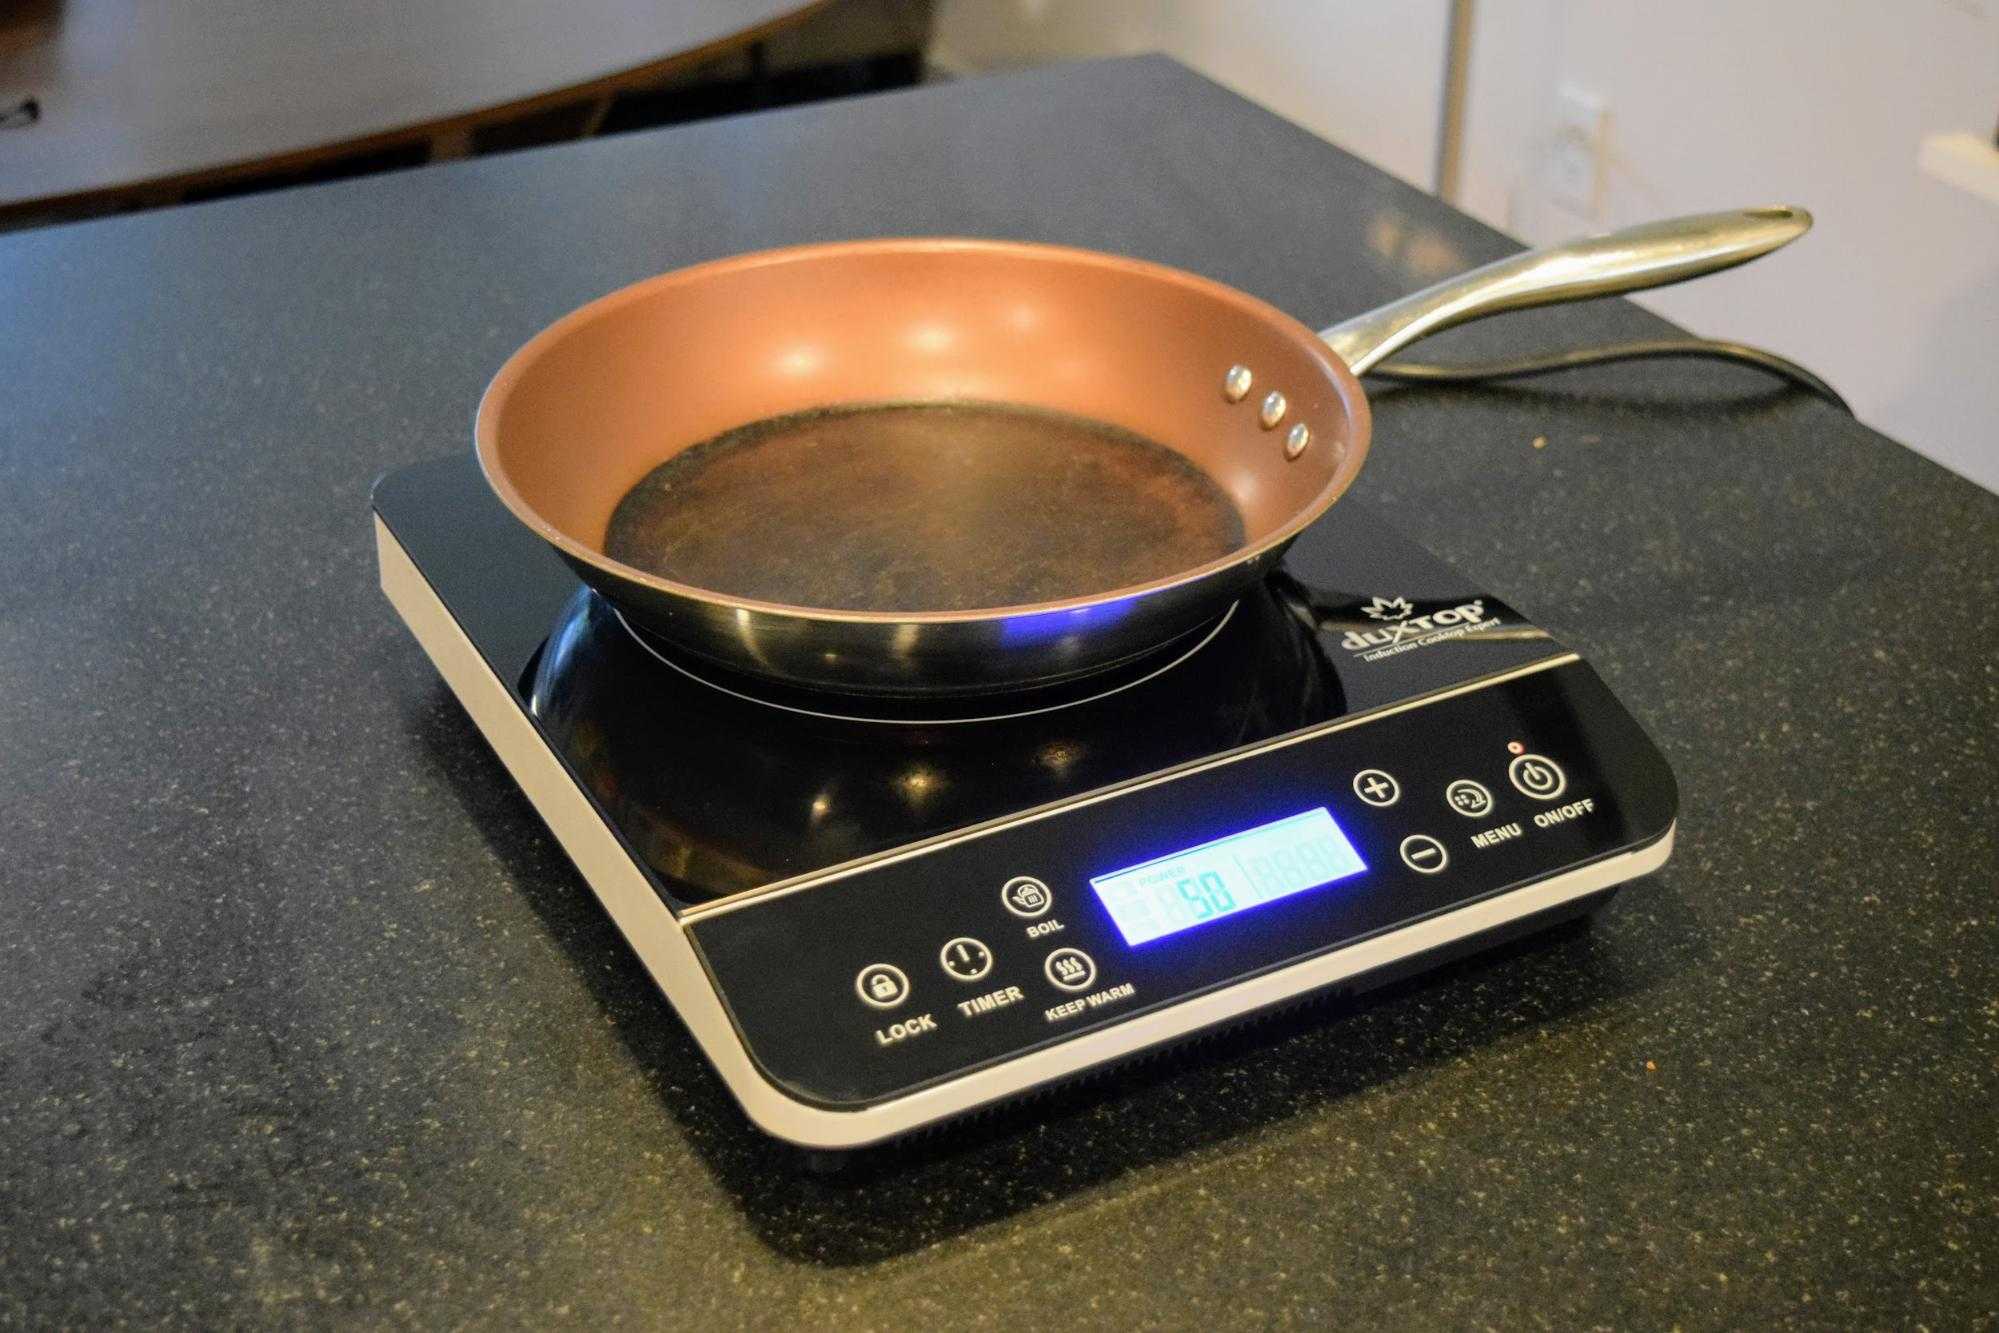 The Best Portable Induction Cooktop